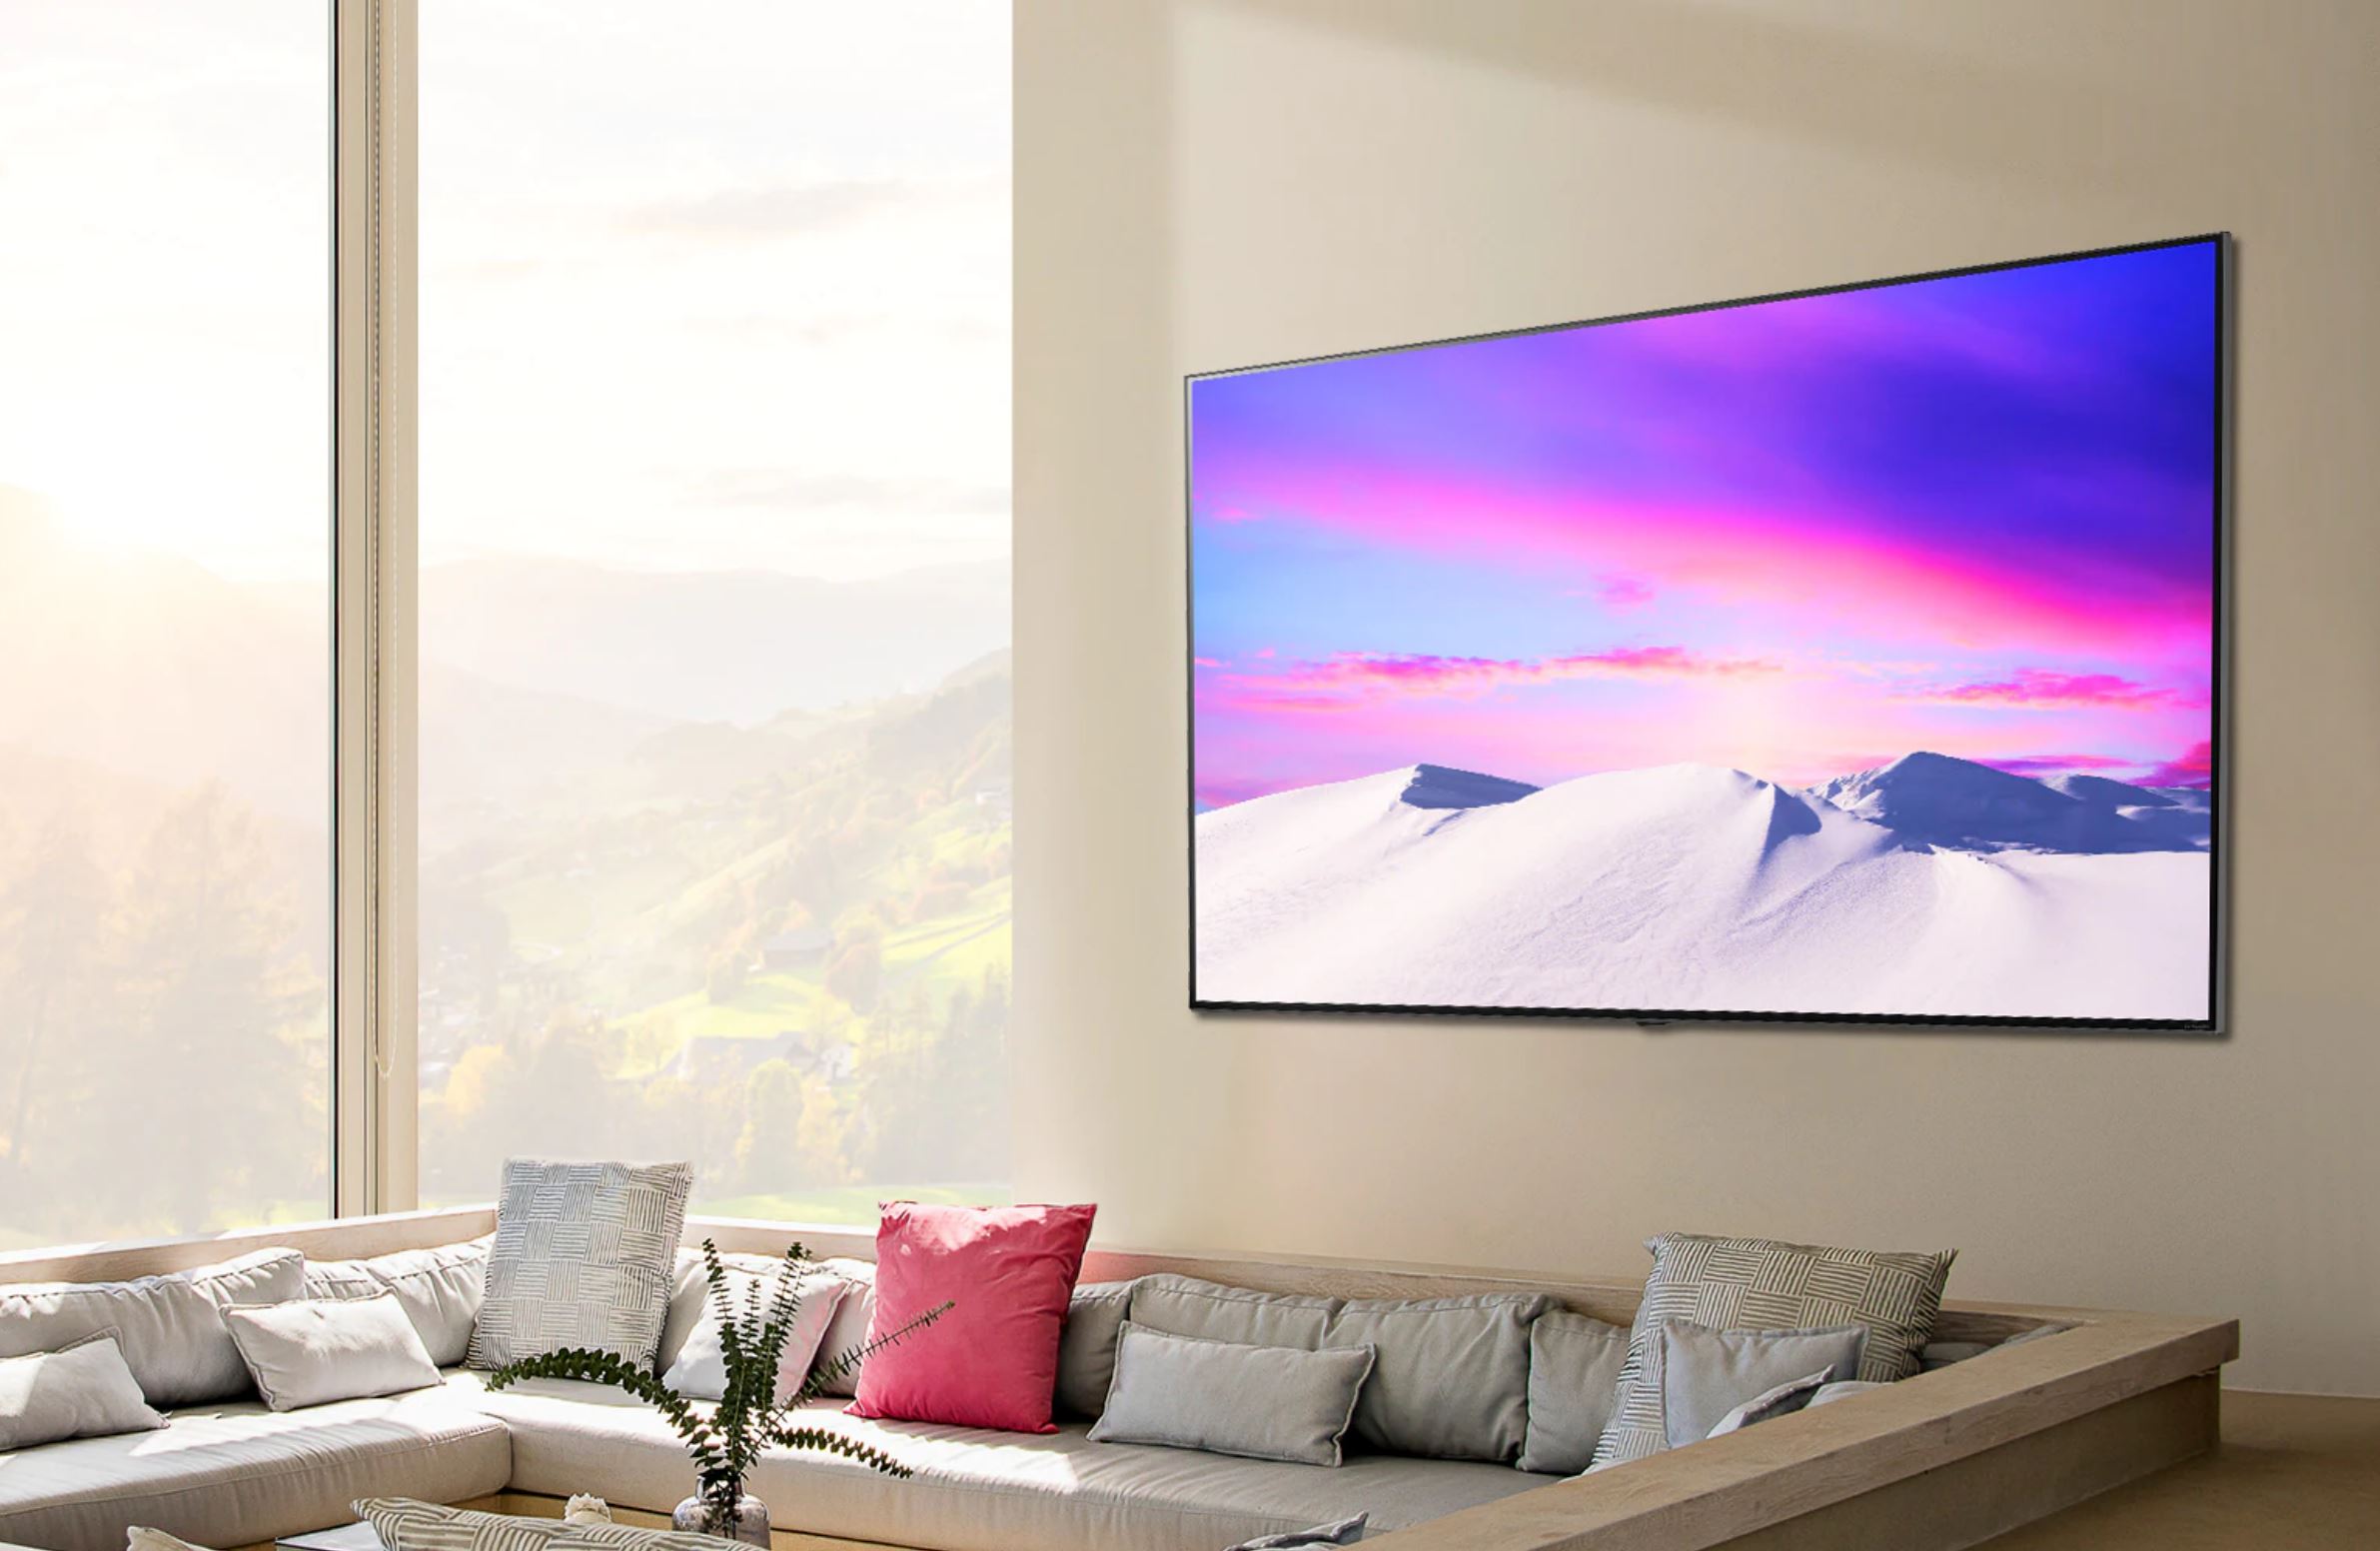 LG QNED91 – a superb 4K MiniLED TV (review)